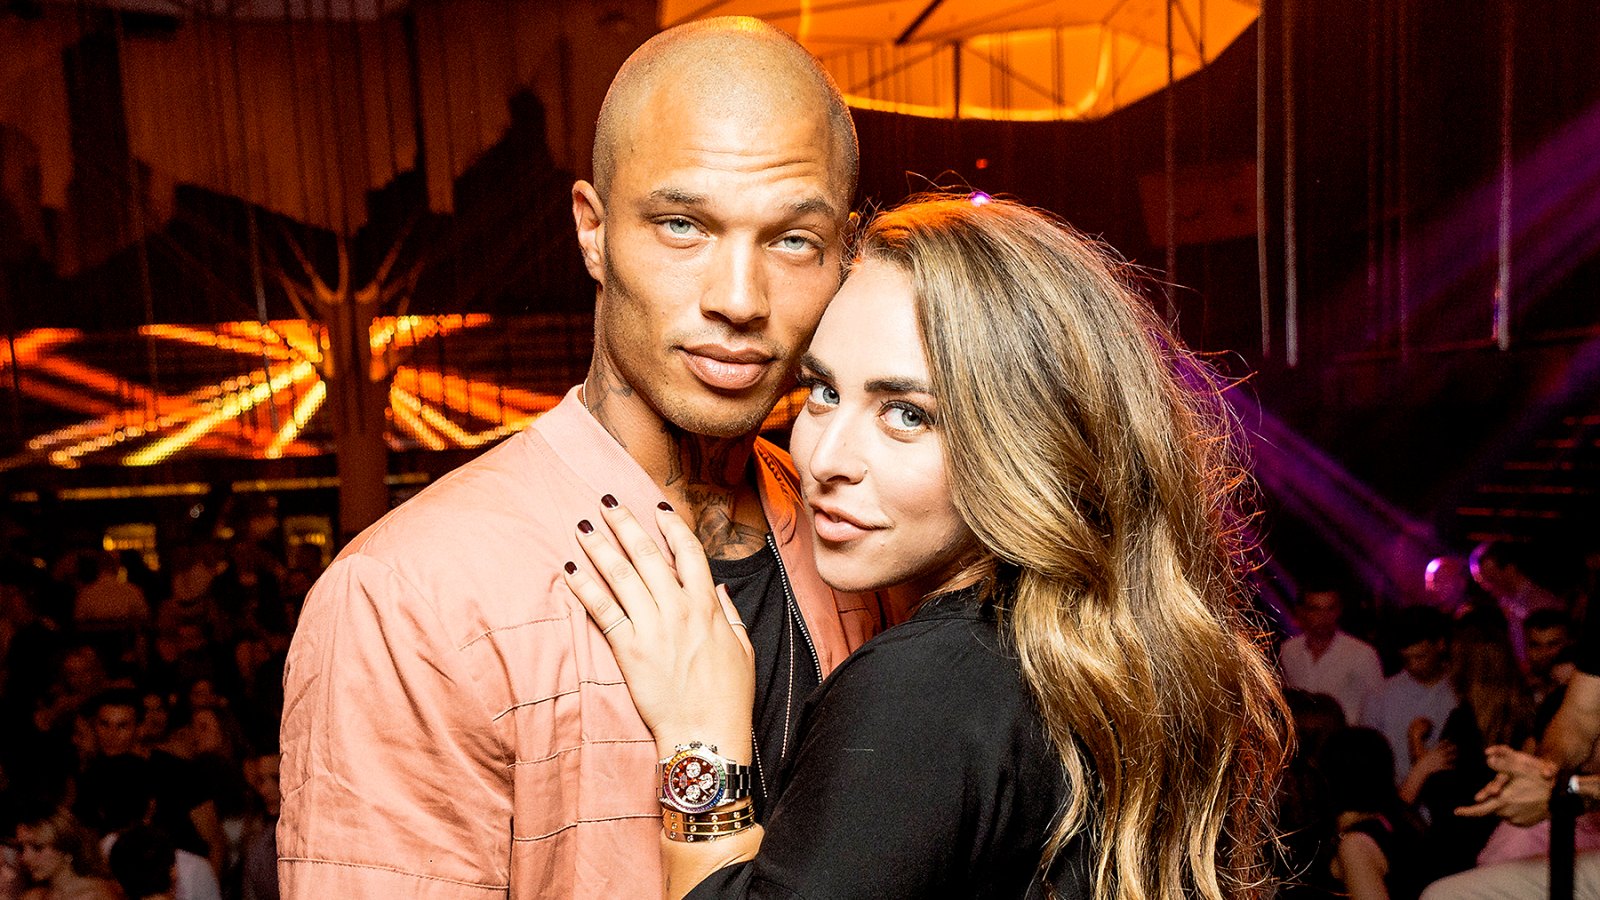 Jeremy Meeks and Chloe Green engaged